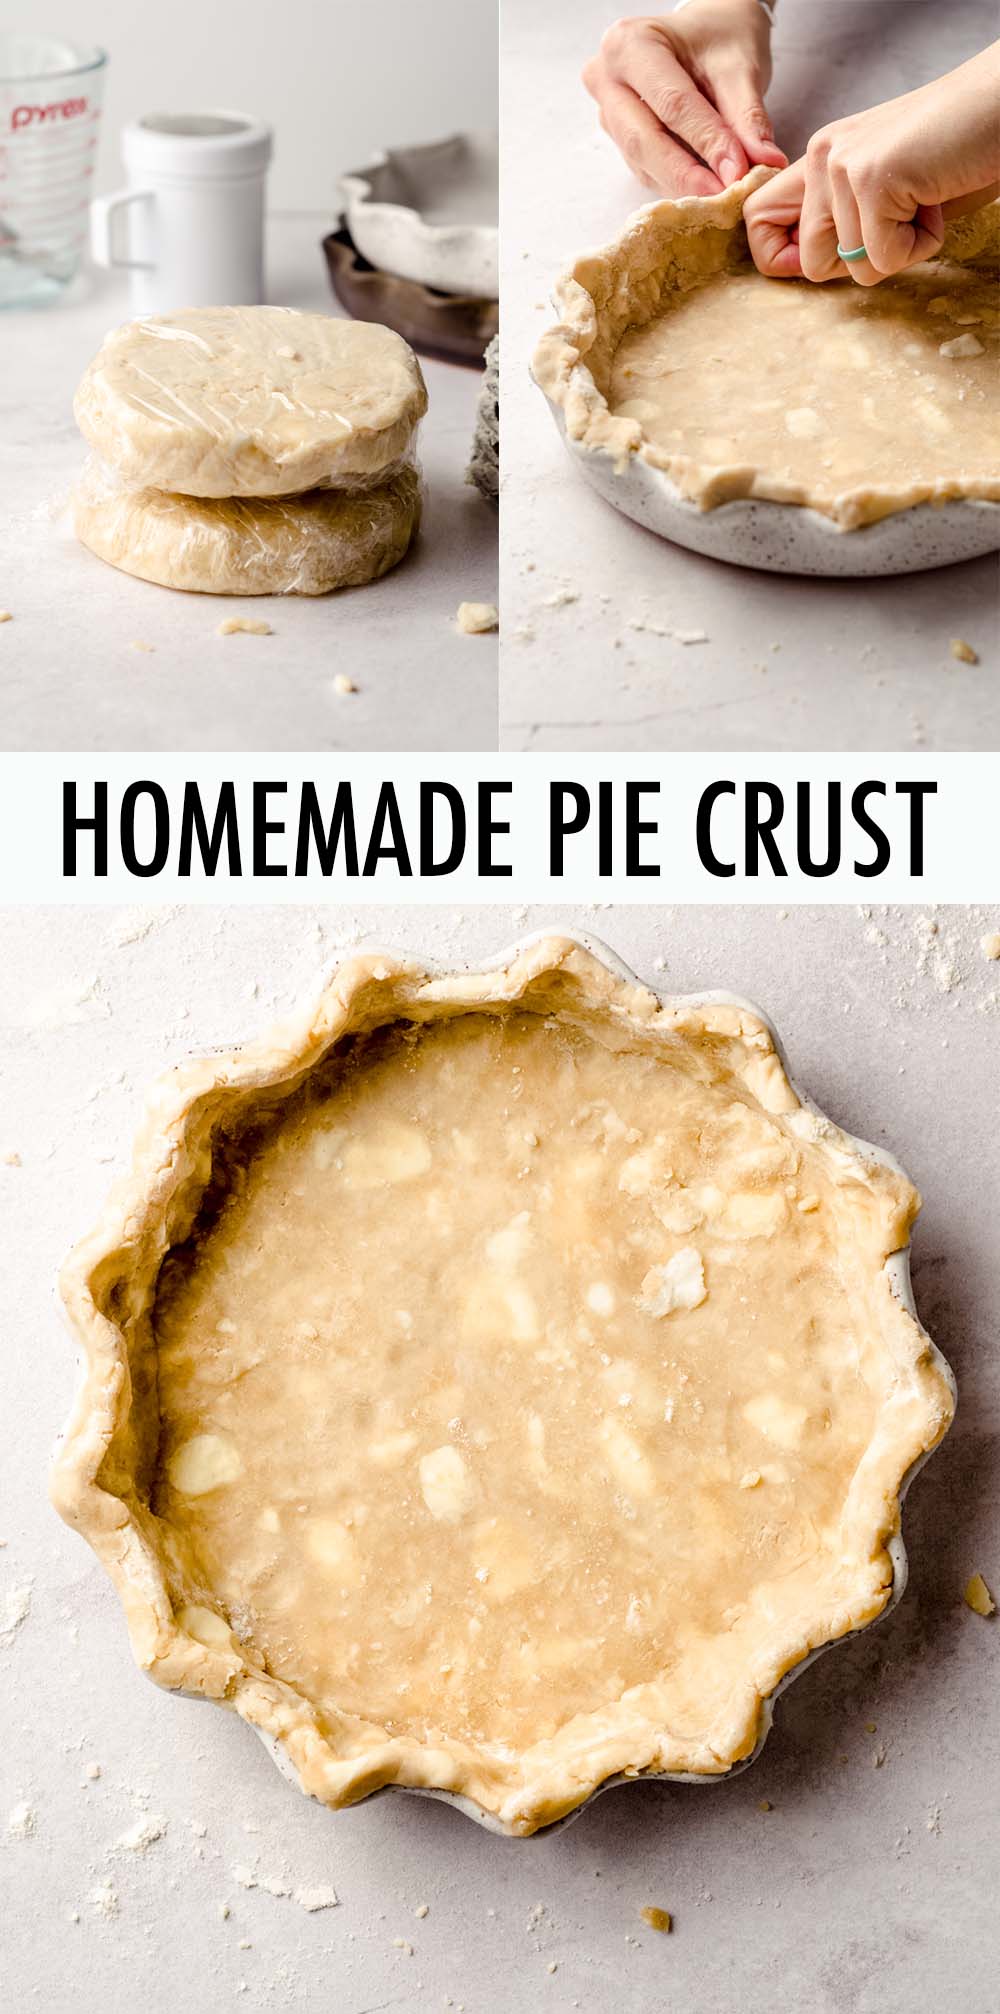 Learn how to make your own buttery, flaky, perfect pie crust at home. This is a double crust recipe. via @frshaprilflours